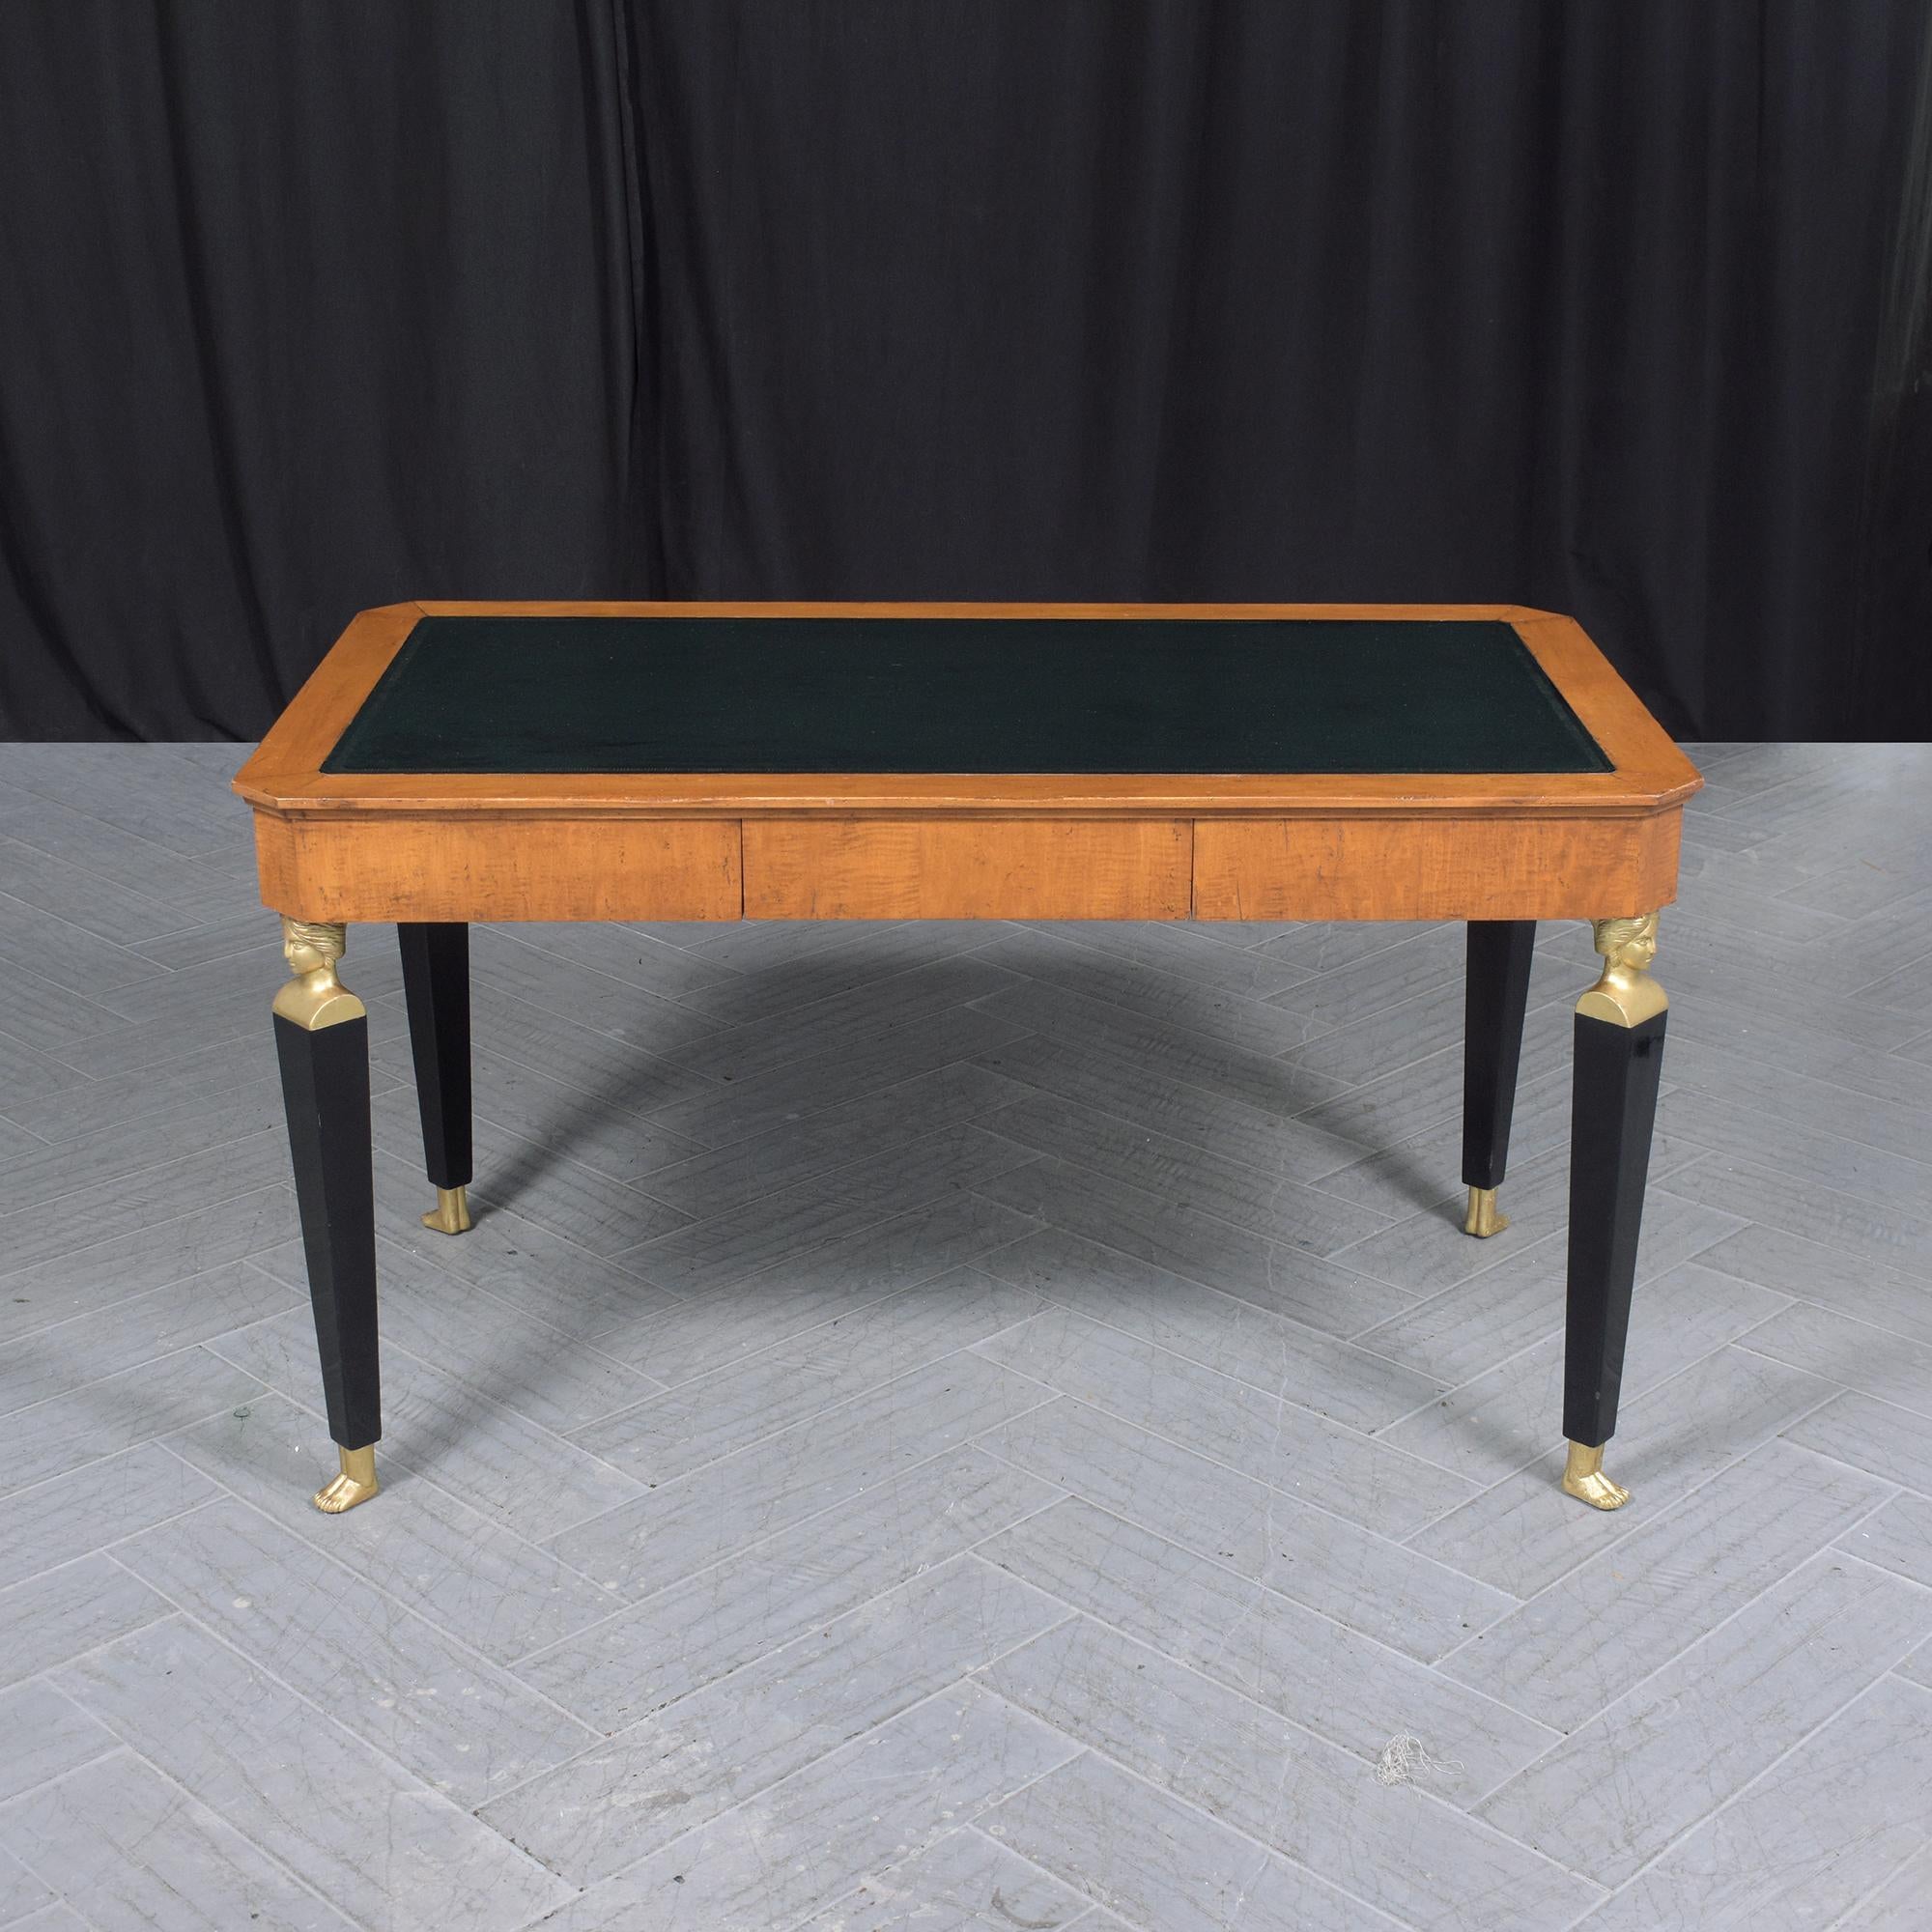 Experience the timeless elegance of our vintage Empire desk, expertly hand-crafted from wood and meticulously restored by our professional in-house team. This exquisite piece is in great condition, featuring a classic rectangular top beautifully